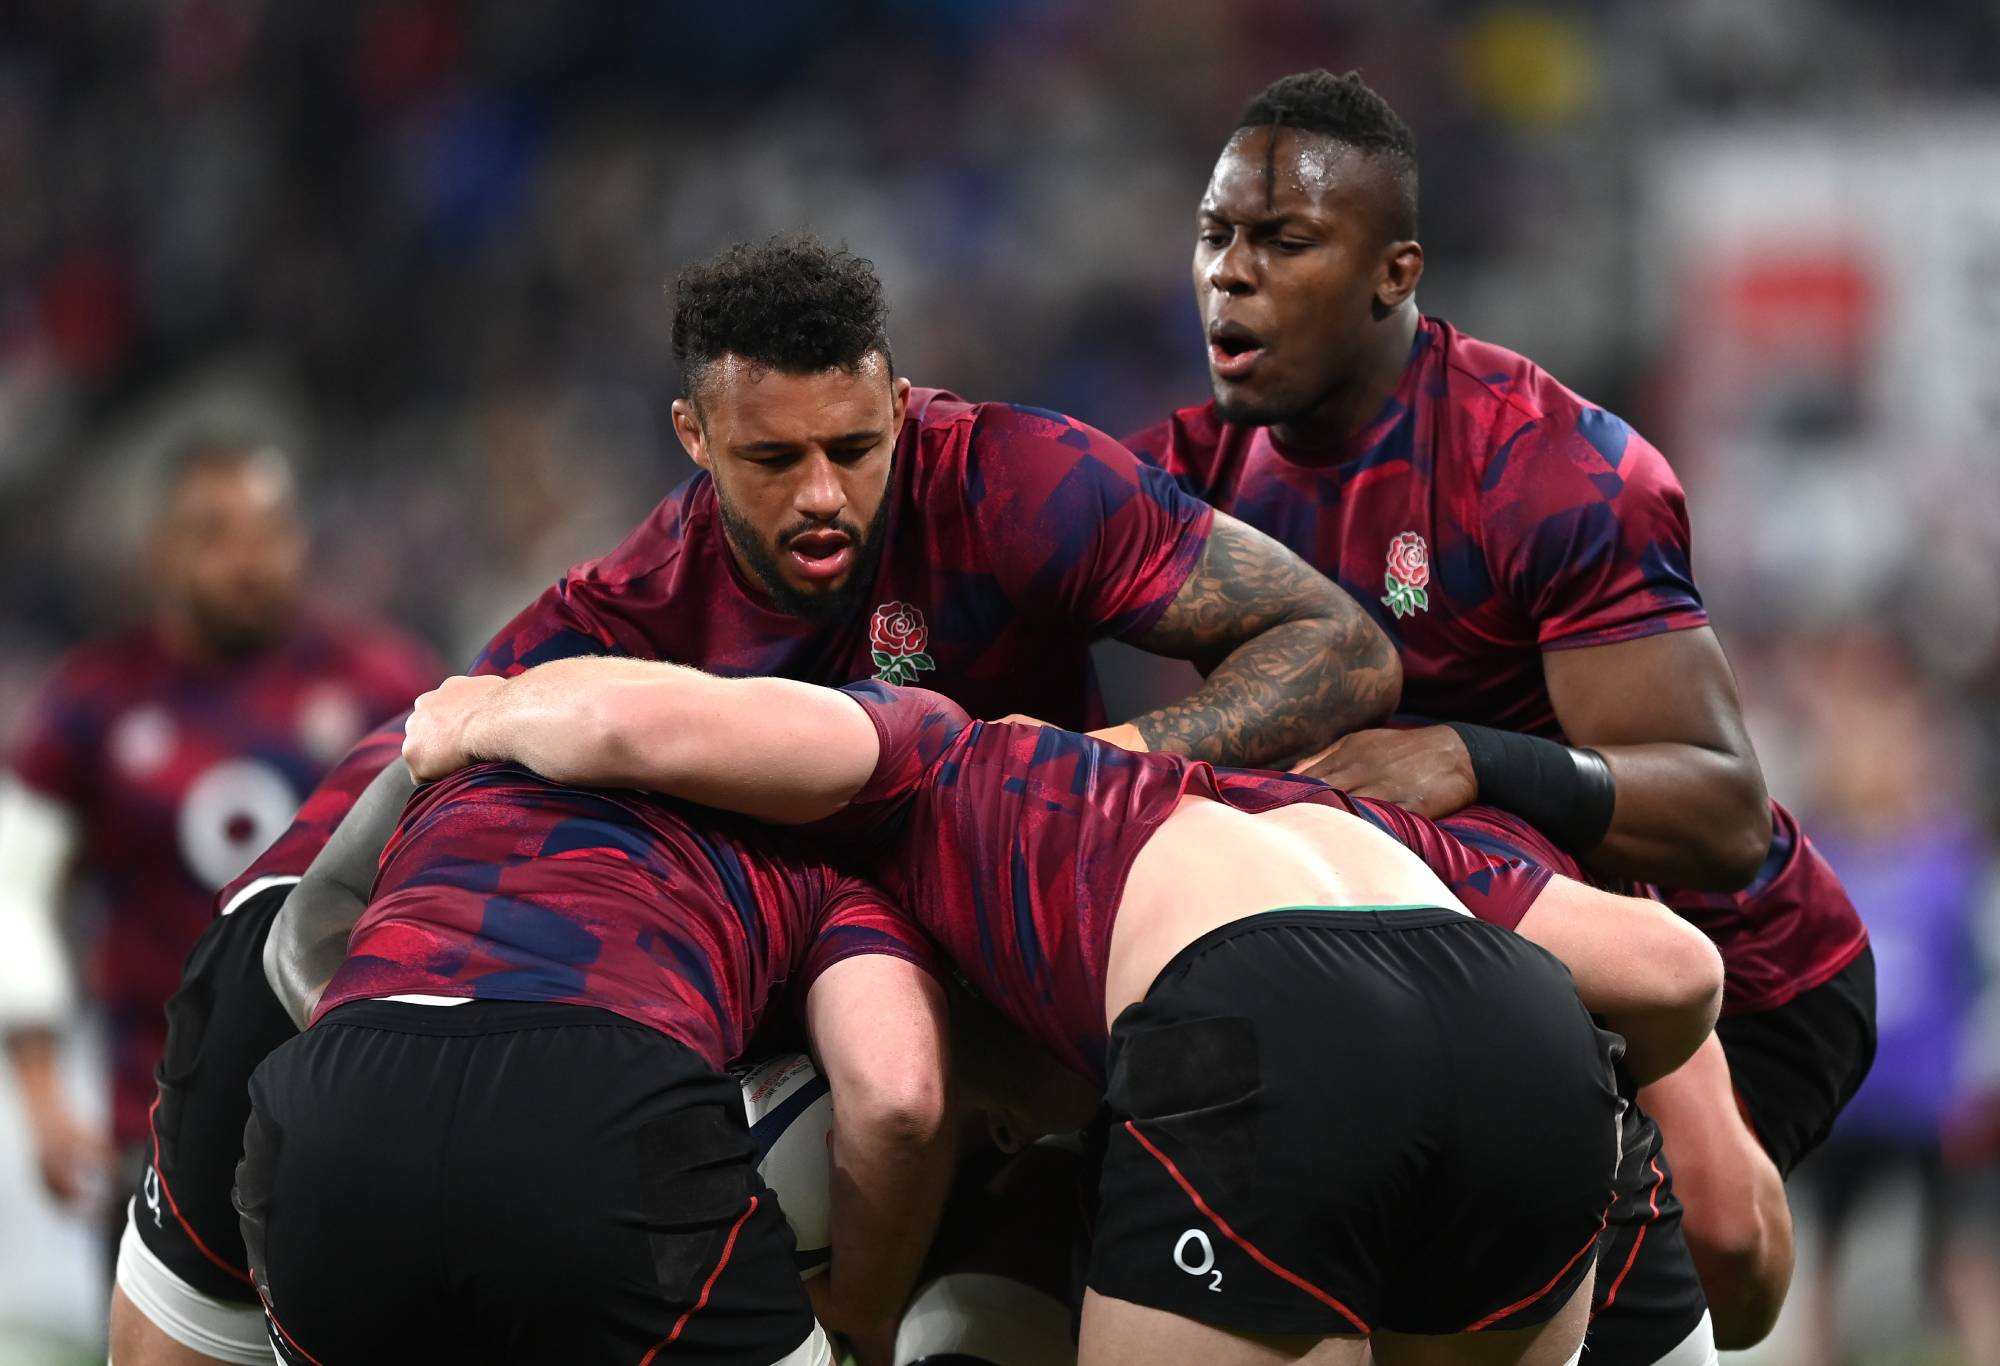 Courtney Lawes of England warms up prior to kick off of the Guinness Six Nations Rugby match between France and England at Stade de France on March 19, 2022 in Paris, France. (Photo by Shaun Botterill/Getty Images)